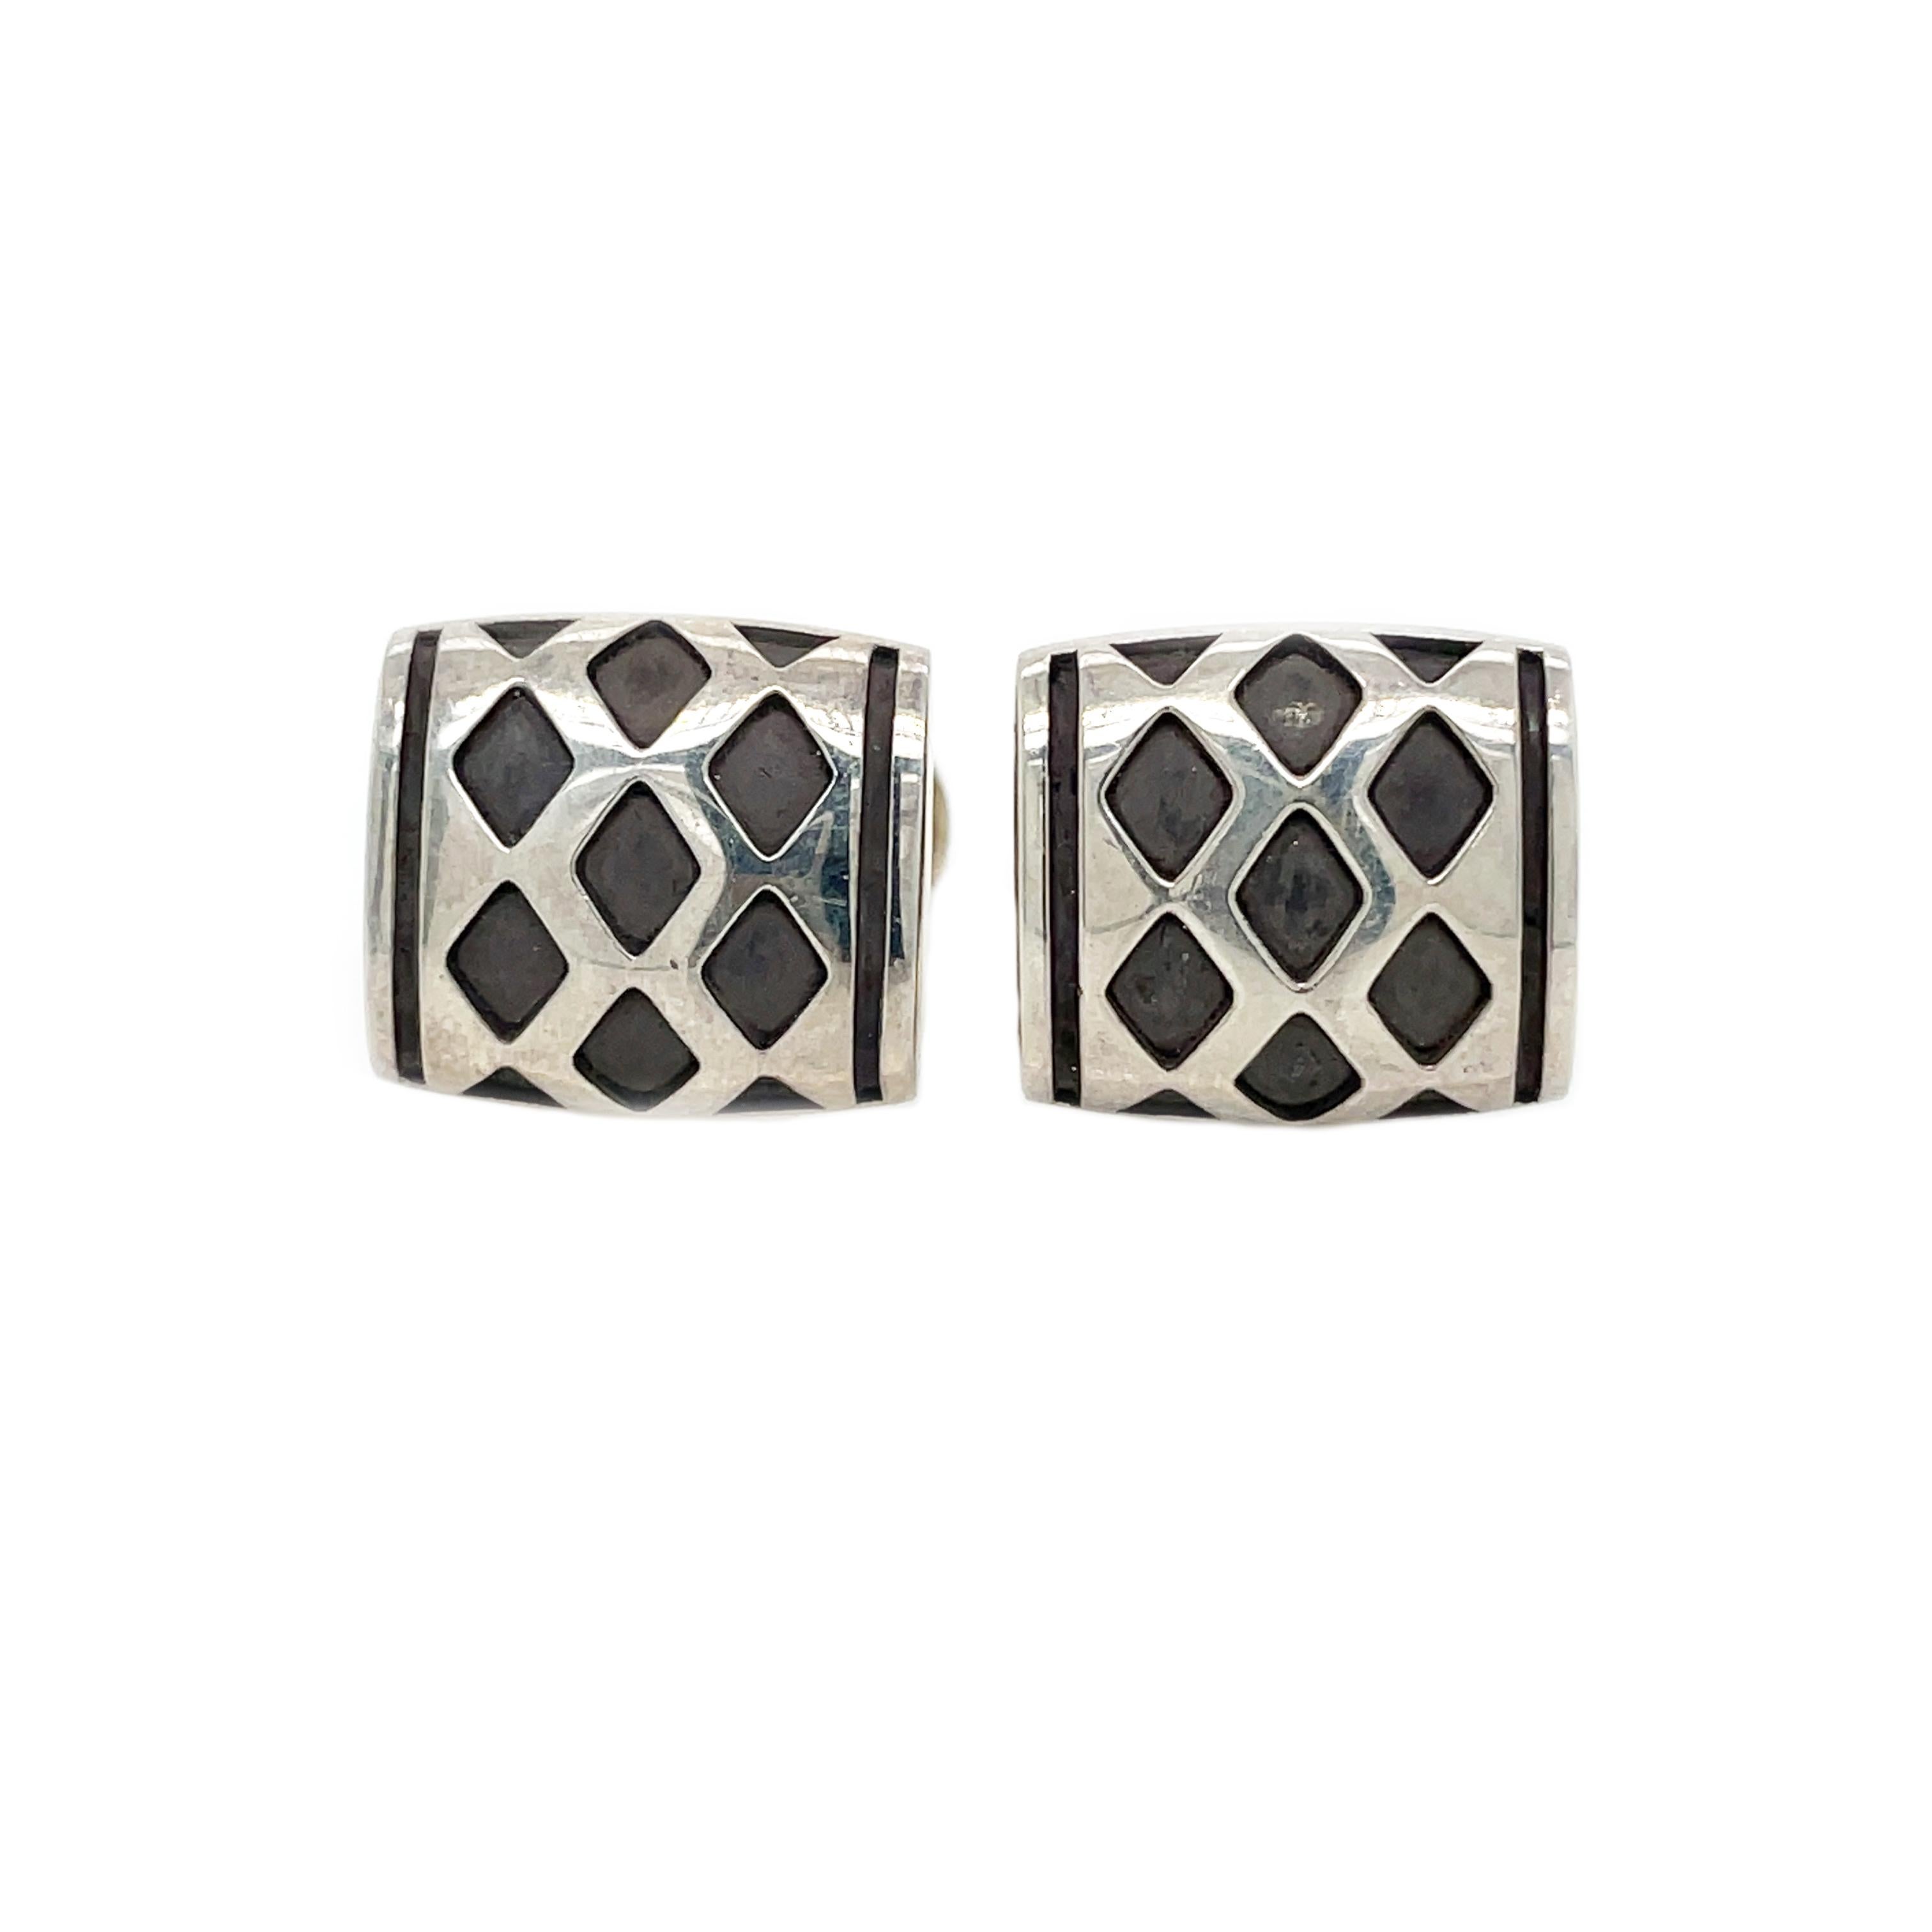 This is an amazing pair of sterling silver cufflinks that showcase a timeless diamond pattern design! This set of cufflinks would look excellent with any shirt for any occasion. These cufflinks are new and have never been worn. New Old Store Stock,